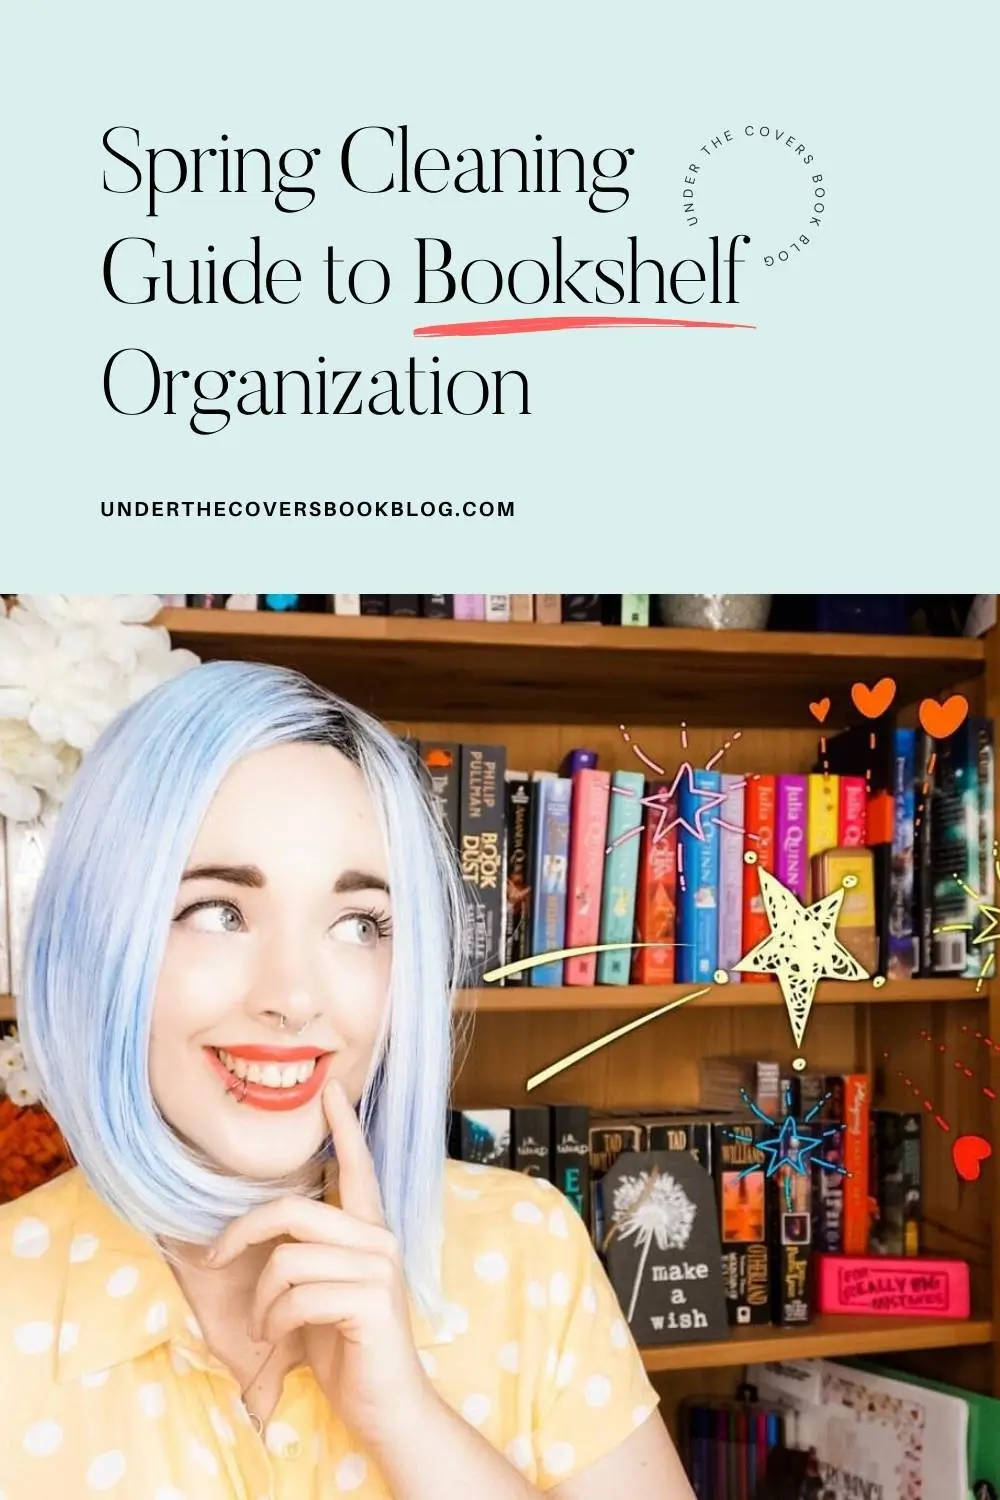 Spring Cleaning Guide to Bookshelf Organization